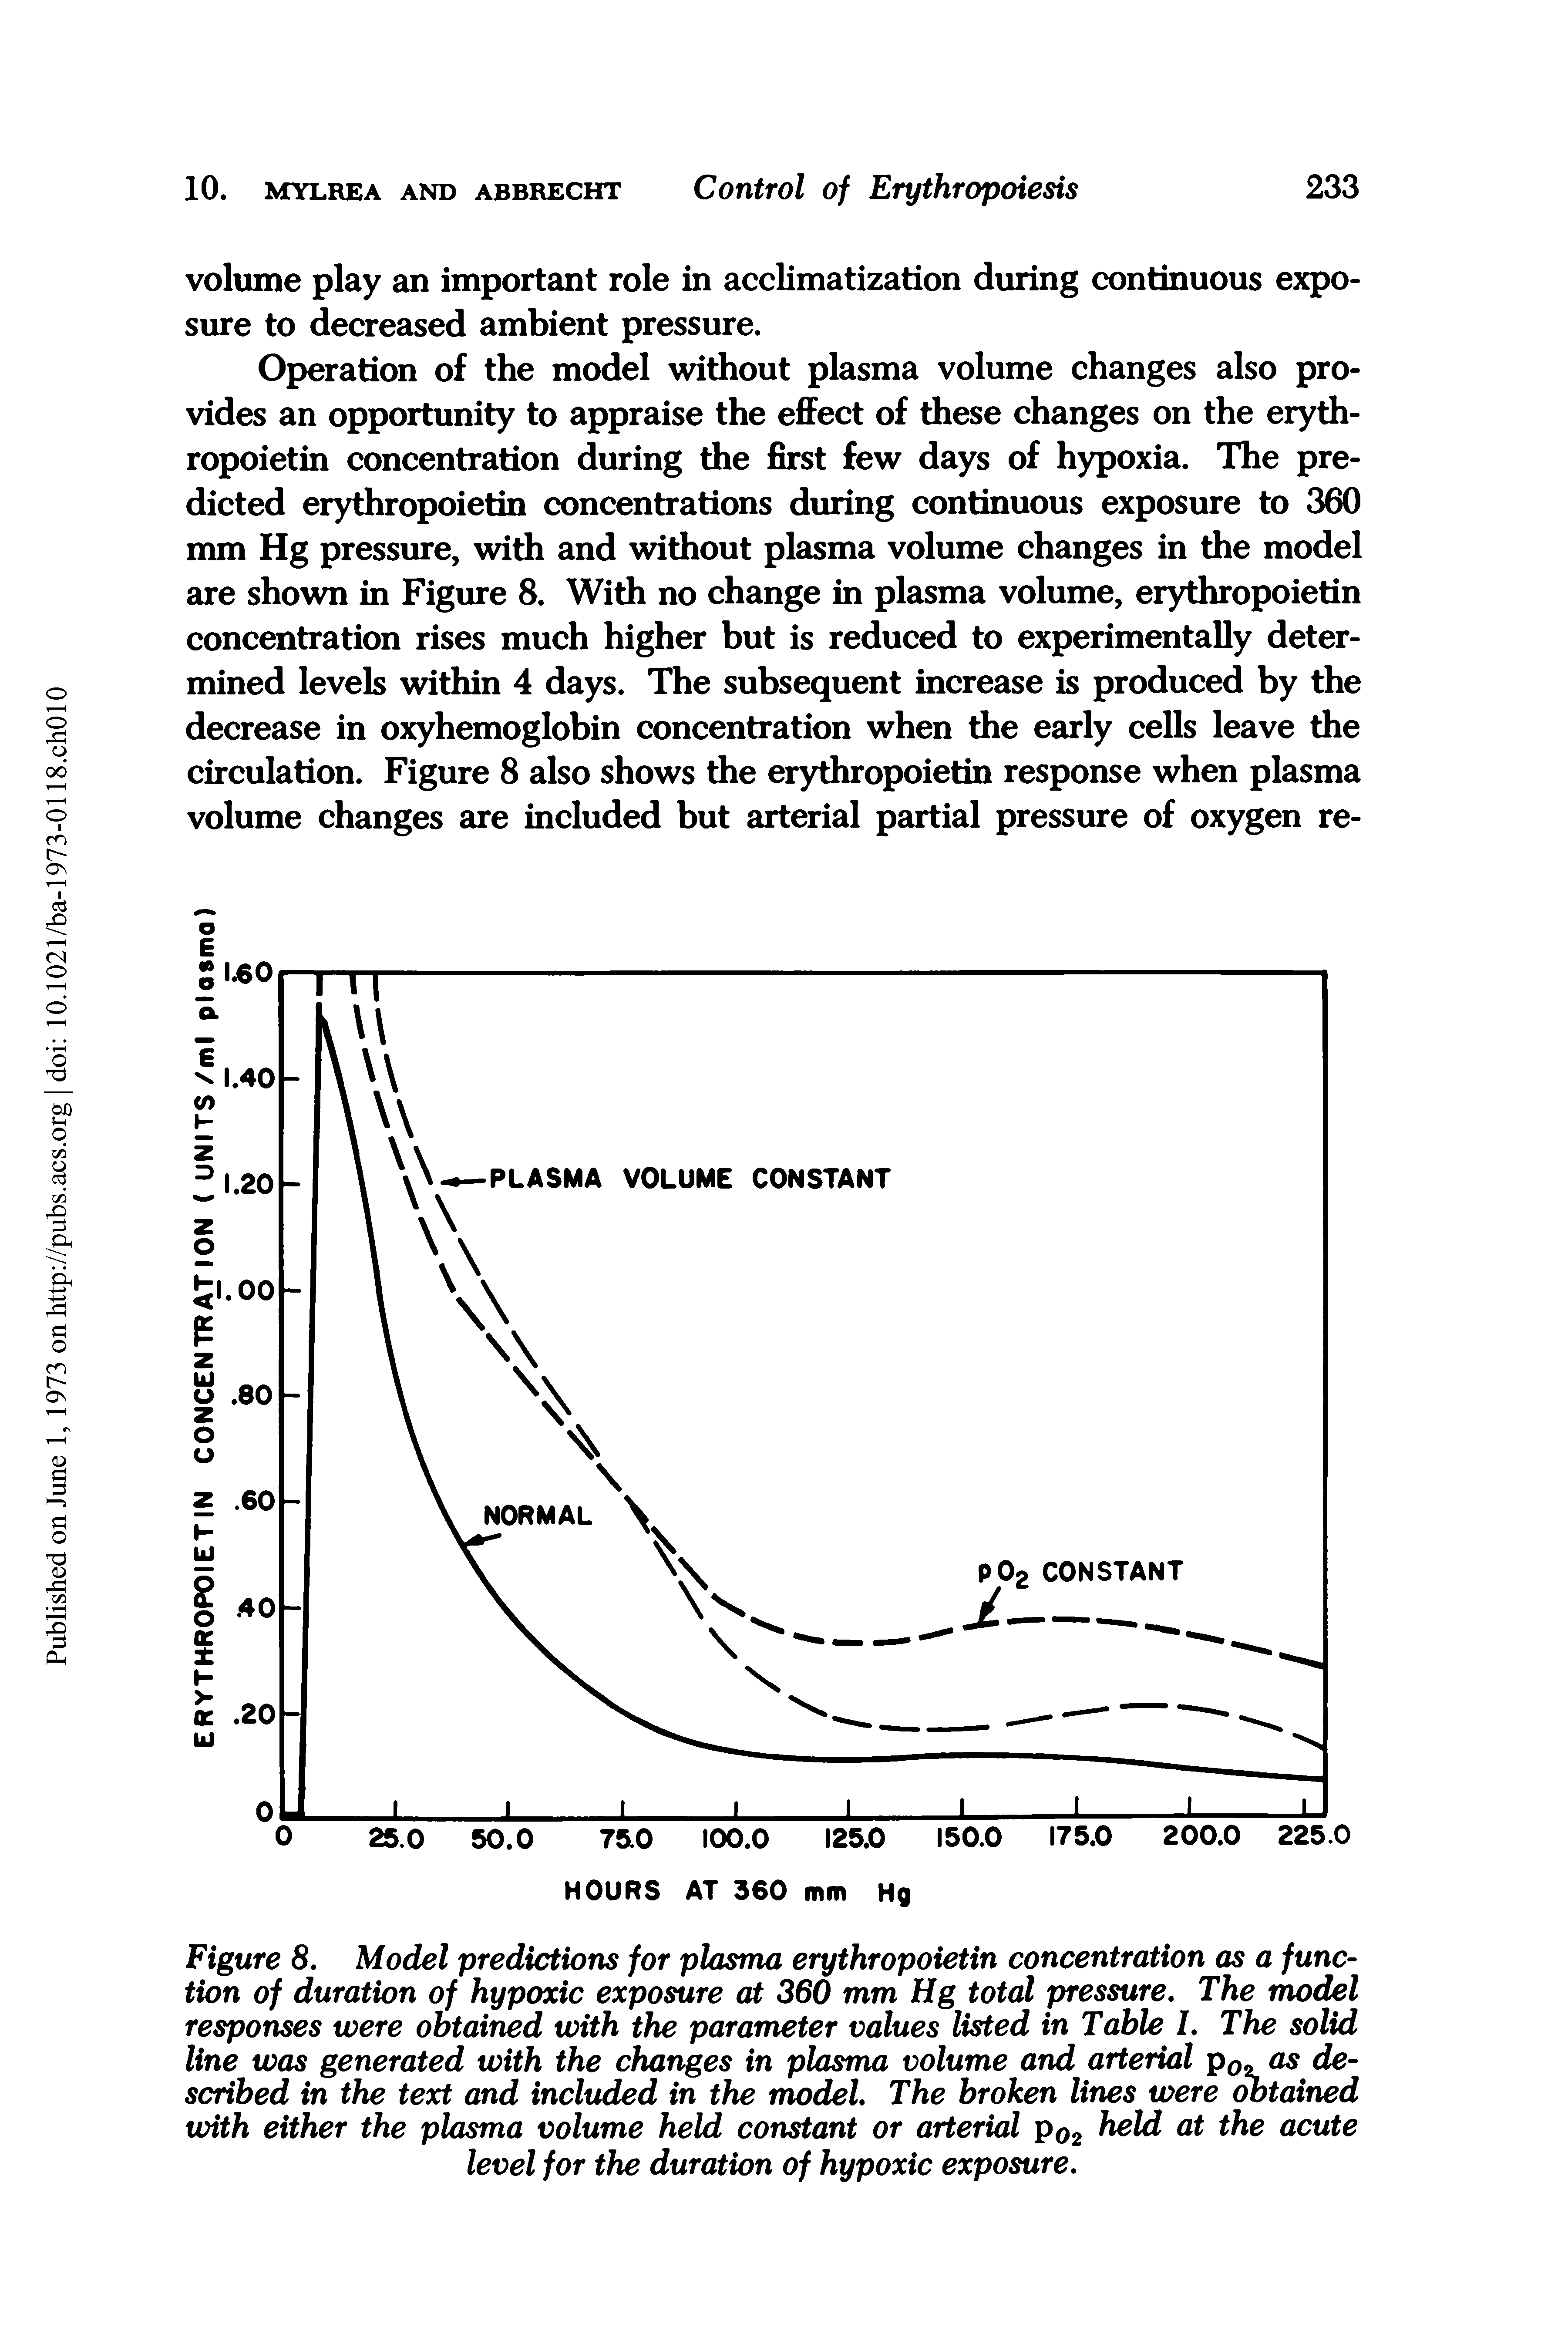 Figure 8. Model predictions for plasma erythropoietin concentration as a function of duration of hypoxic exposure at 360 mm Hg total pressure. The model responses were obtained with the parameter values listed in Table 1. The solid line was generated with the changes in plasma volume and arterial p0 as described in the text and included in the model. The broken lines were obtained with either the plasma volume held constant or arterial p02 held at the acute level for the duration of hypoxic exposure.